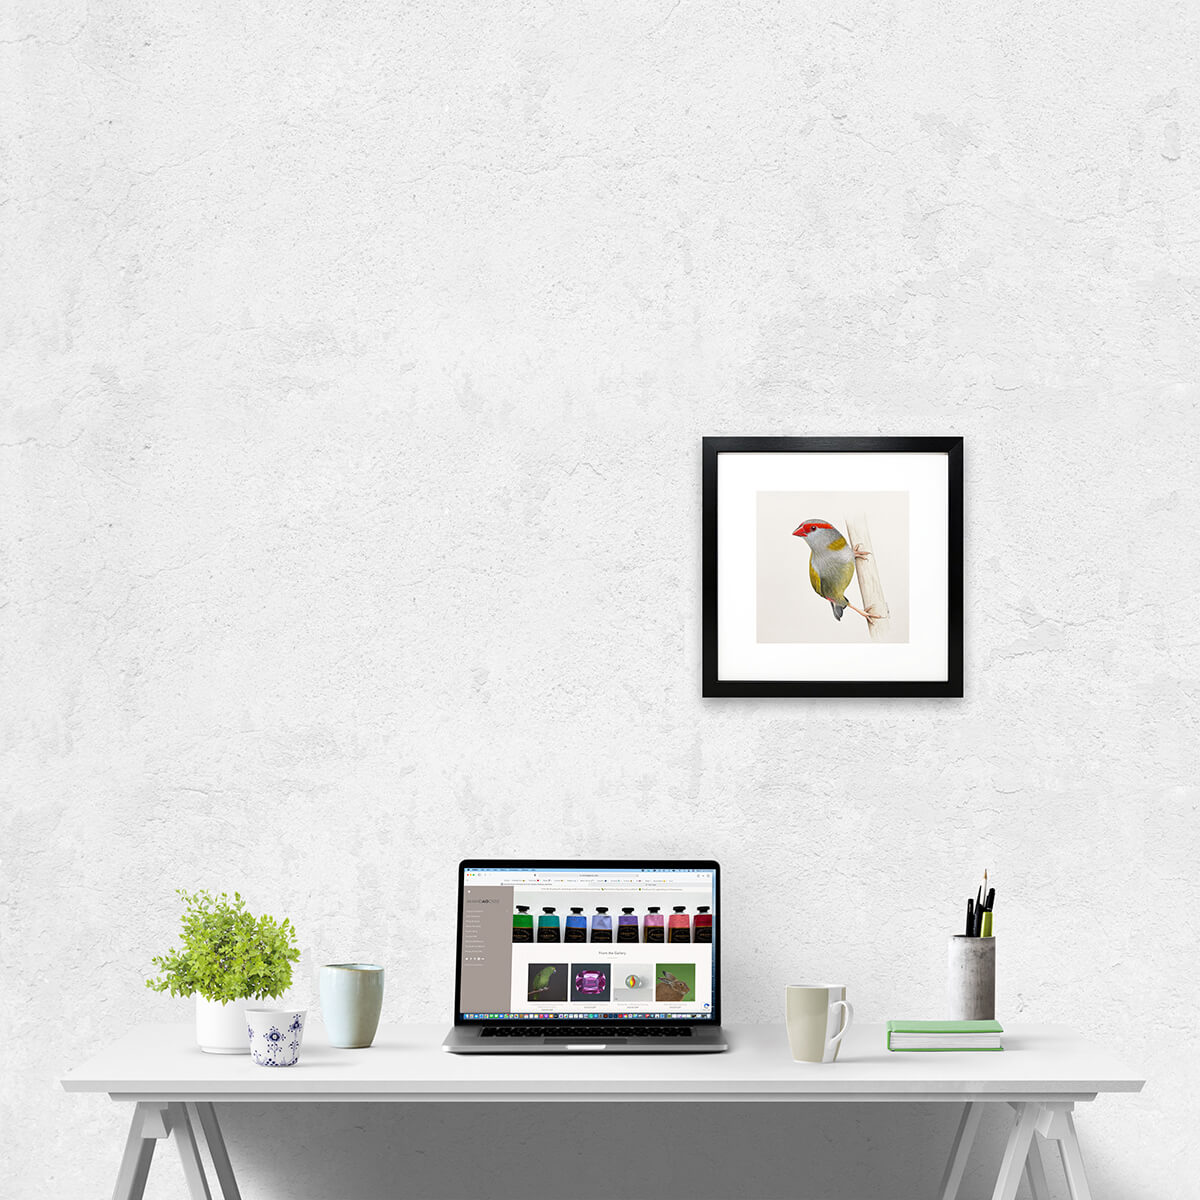 Original gouache on paper painting of a red-browed finch bird by artist Amanda Gosse in room setting